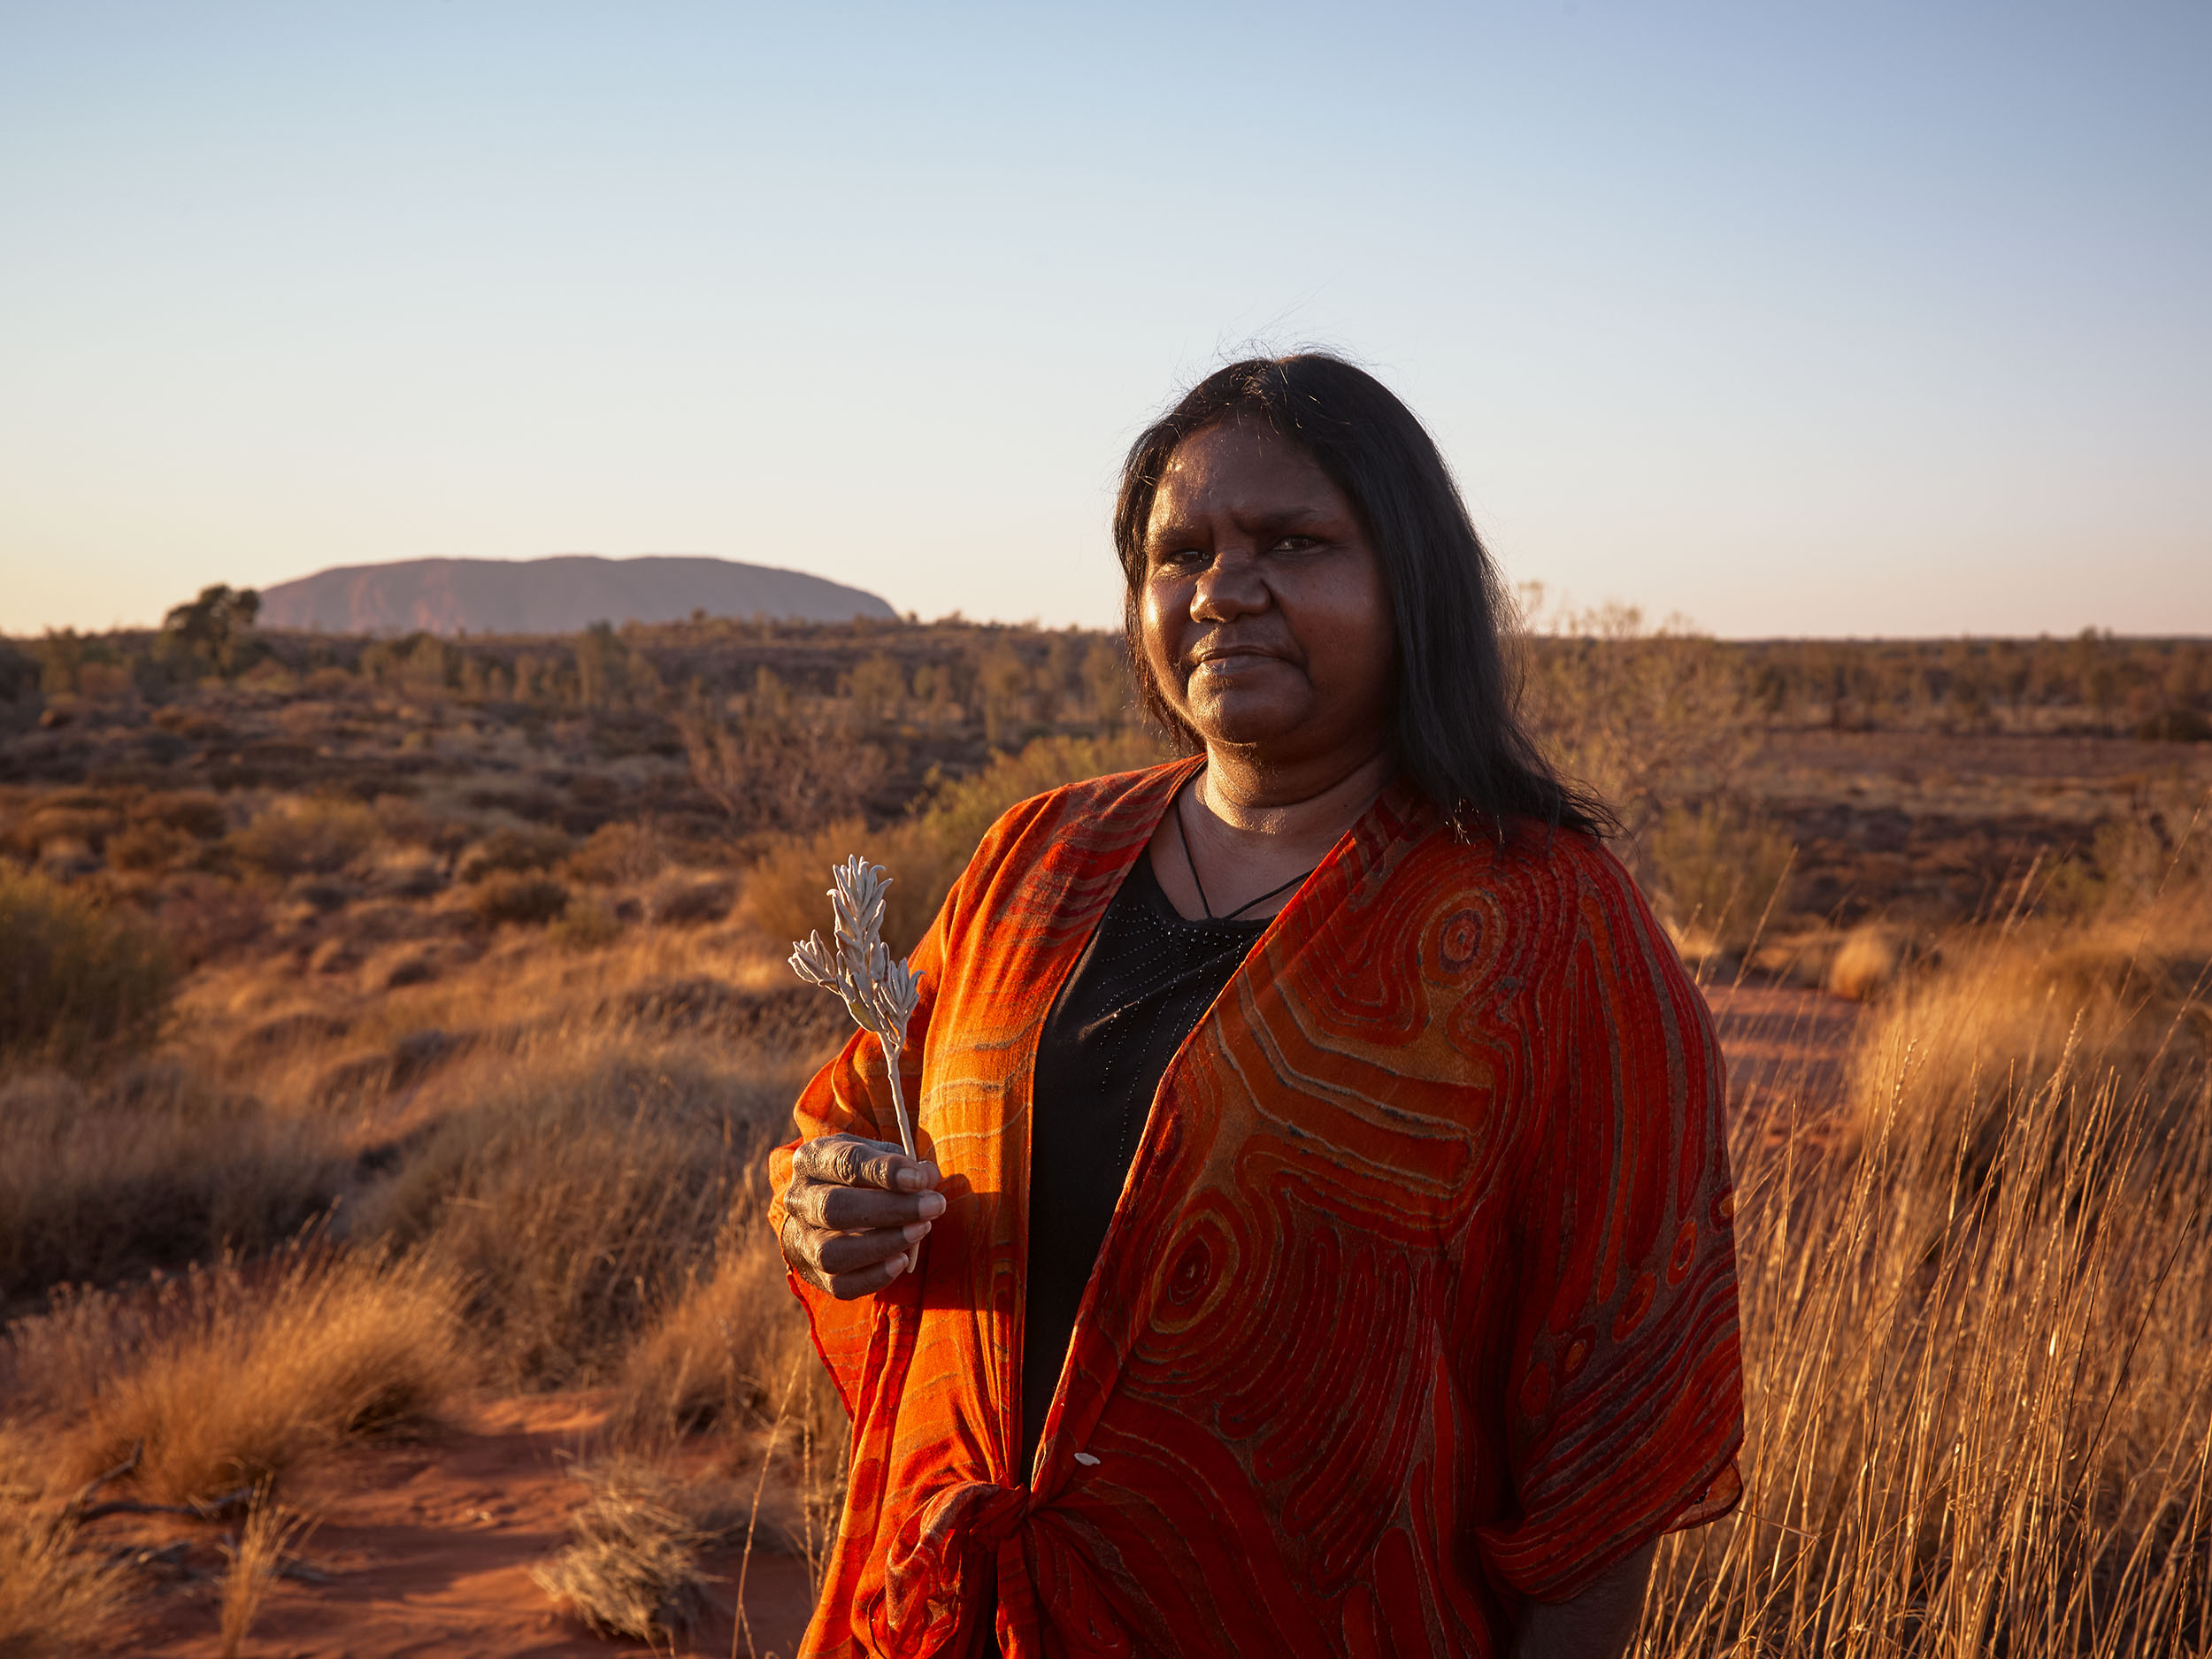 An Anangu woman holds a flower with Uluru in the background